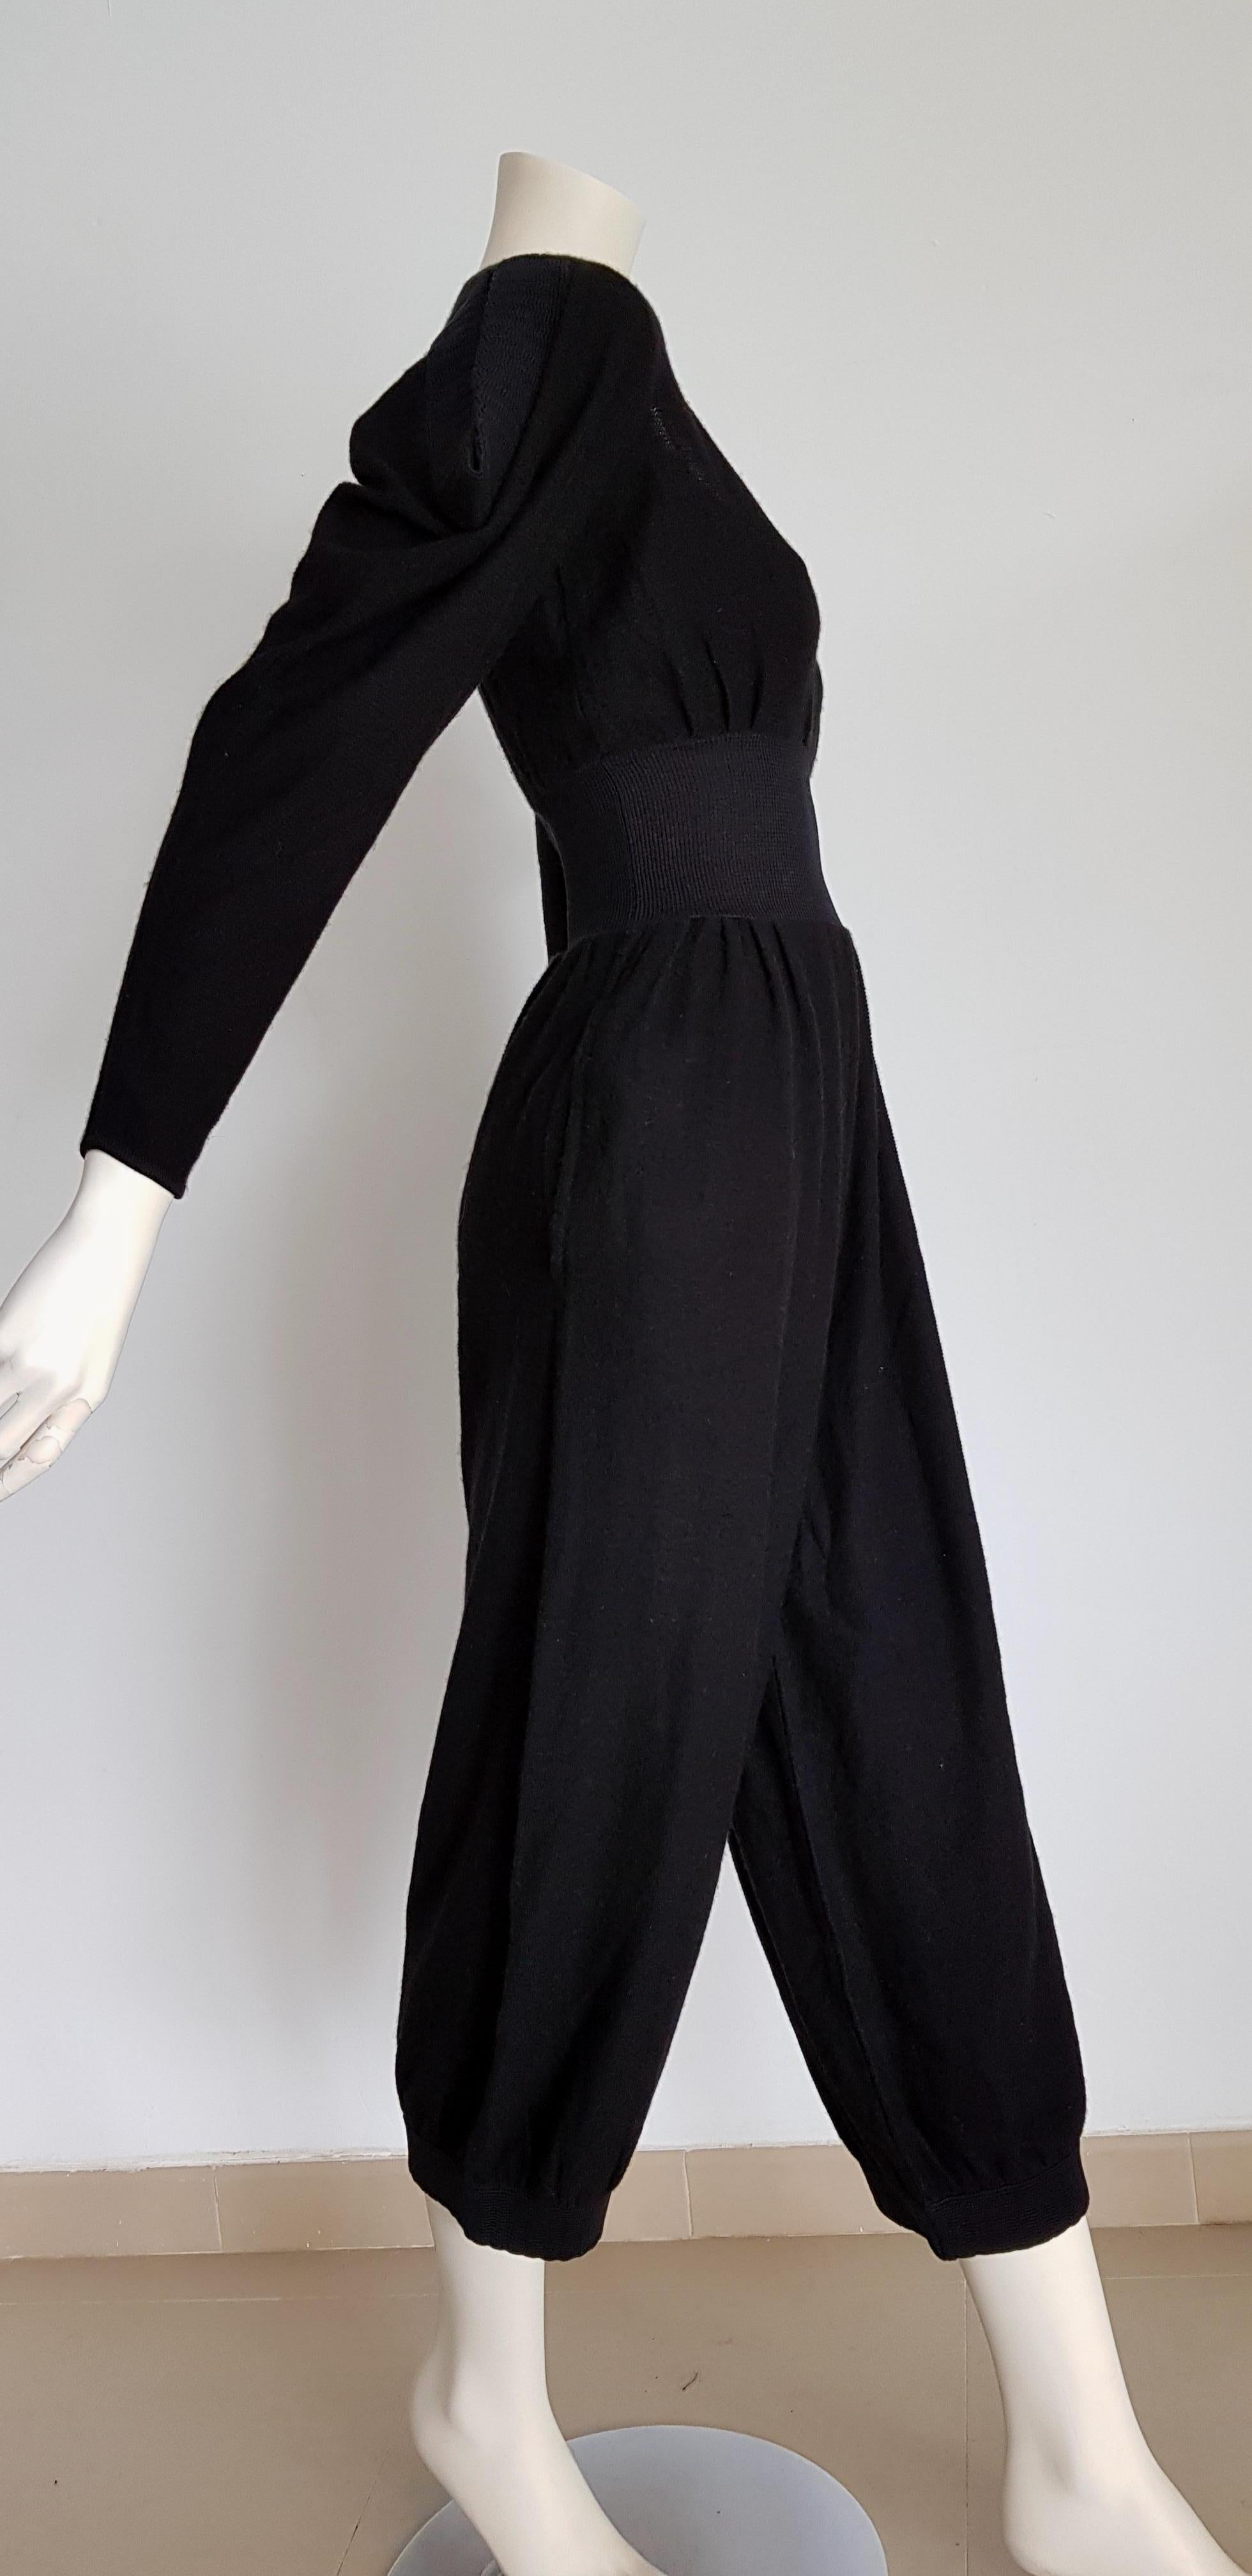 HERMES black cashmere and silk jumpsuit with elasticated waistband - Unworn, New.

SIZE: equivalent to about Small / Medium, please review approx measurements as follows in cm. 
JUMPSUIT: lenght 126, chest underarm to underarm 47, bust circumference